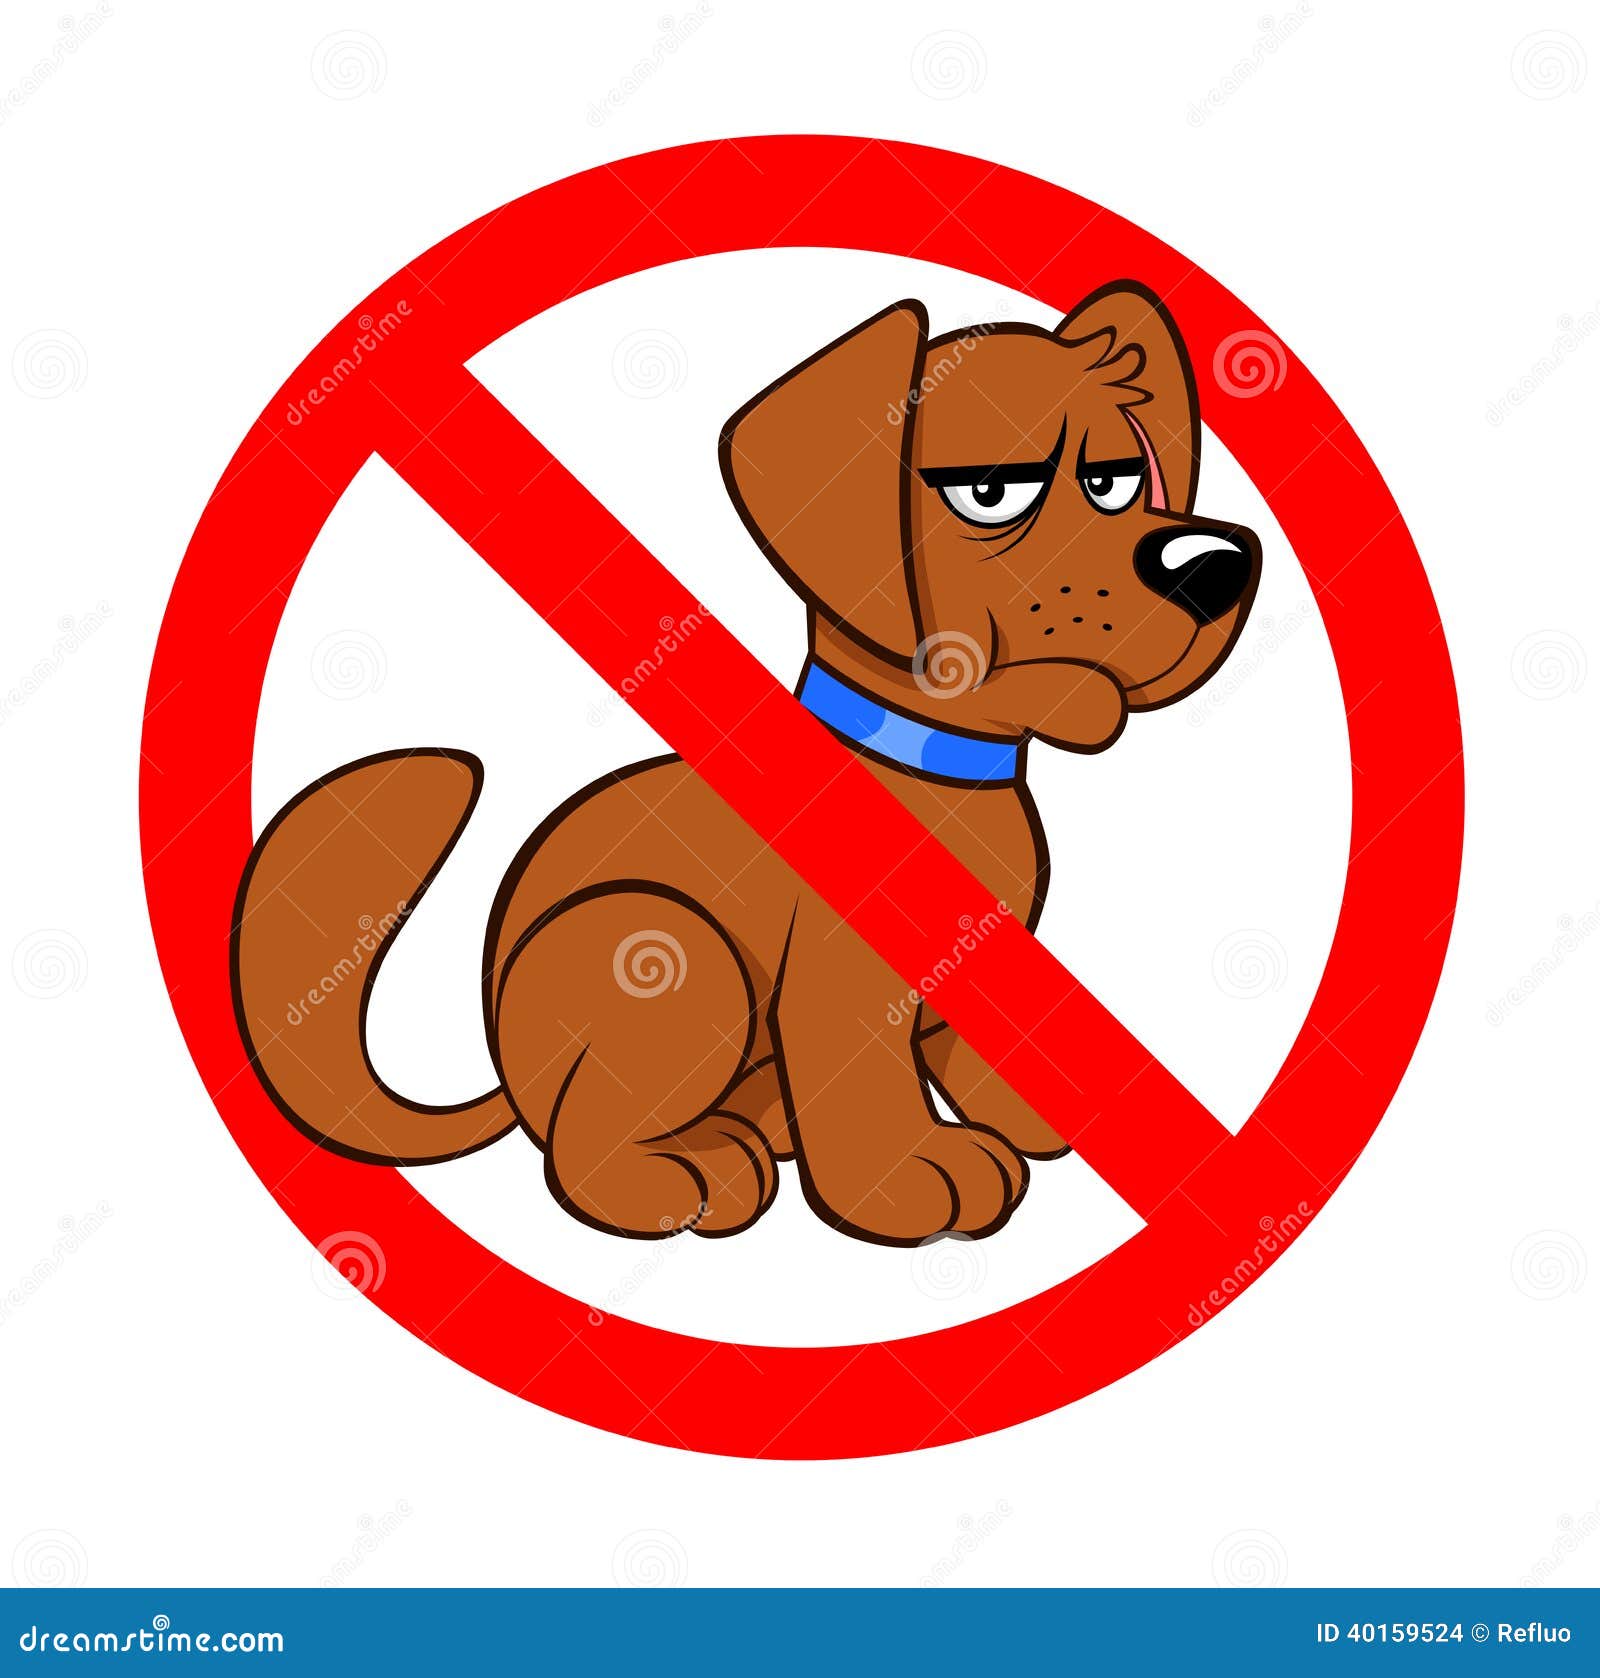 dogs prohibited sign